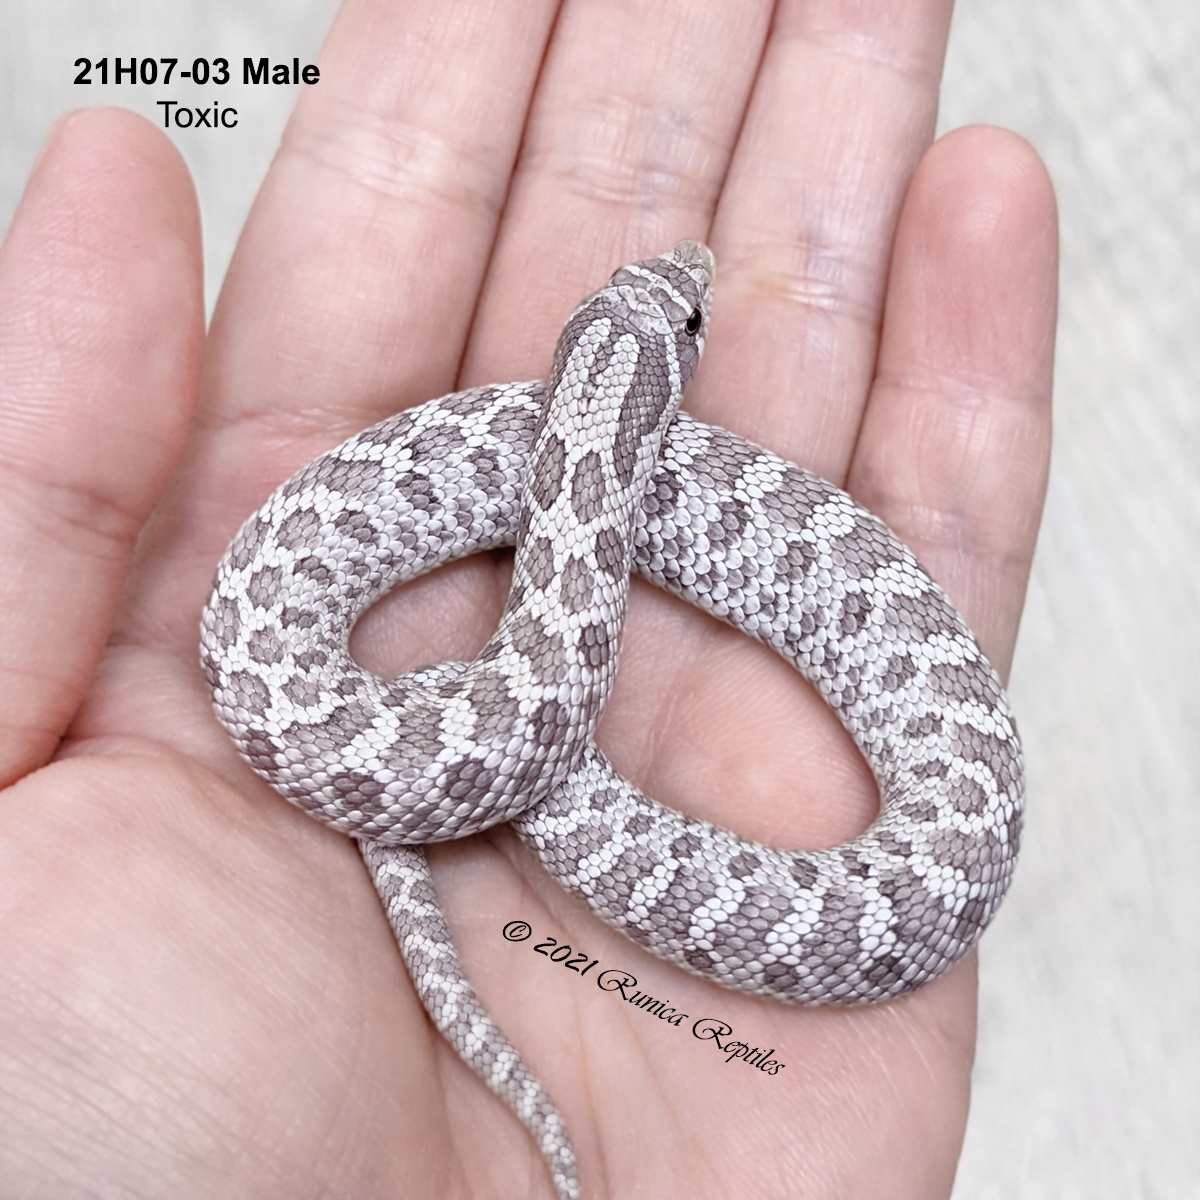 Toxic Western Hognose by Runica Reptiles